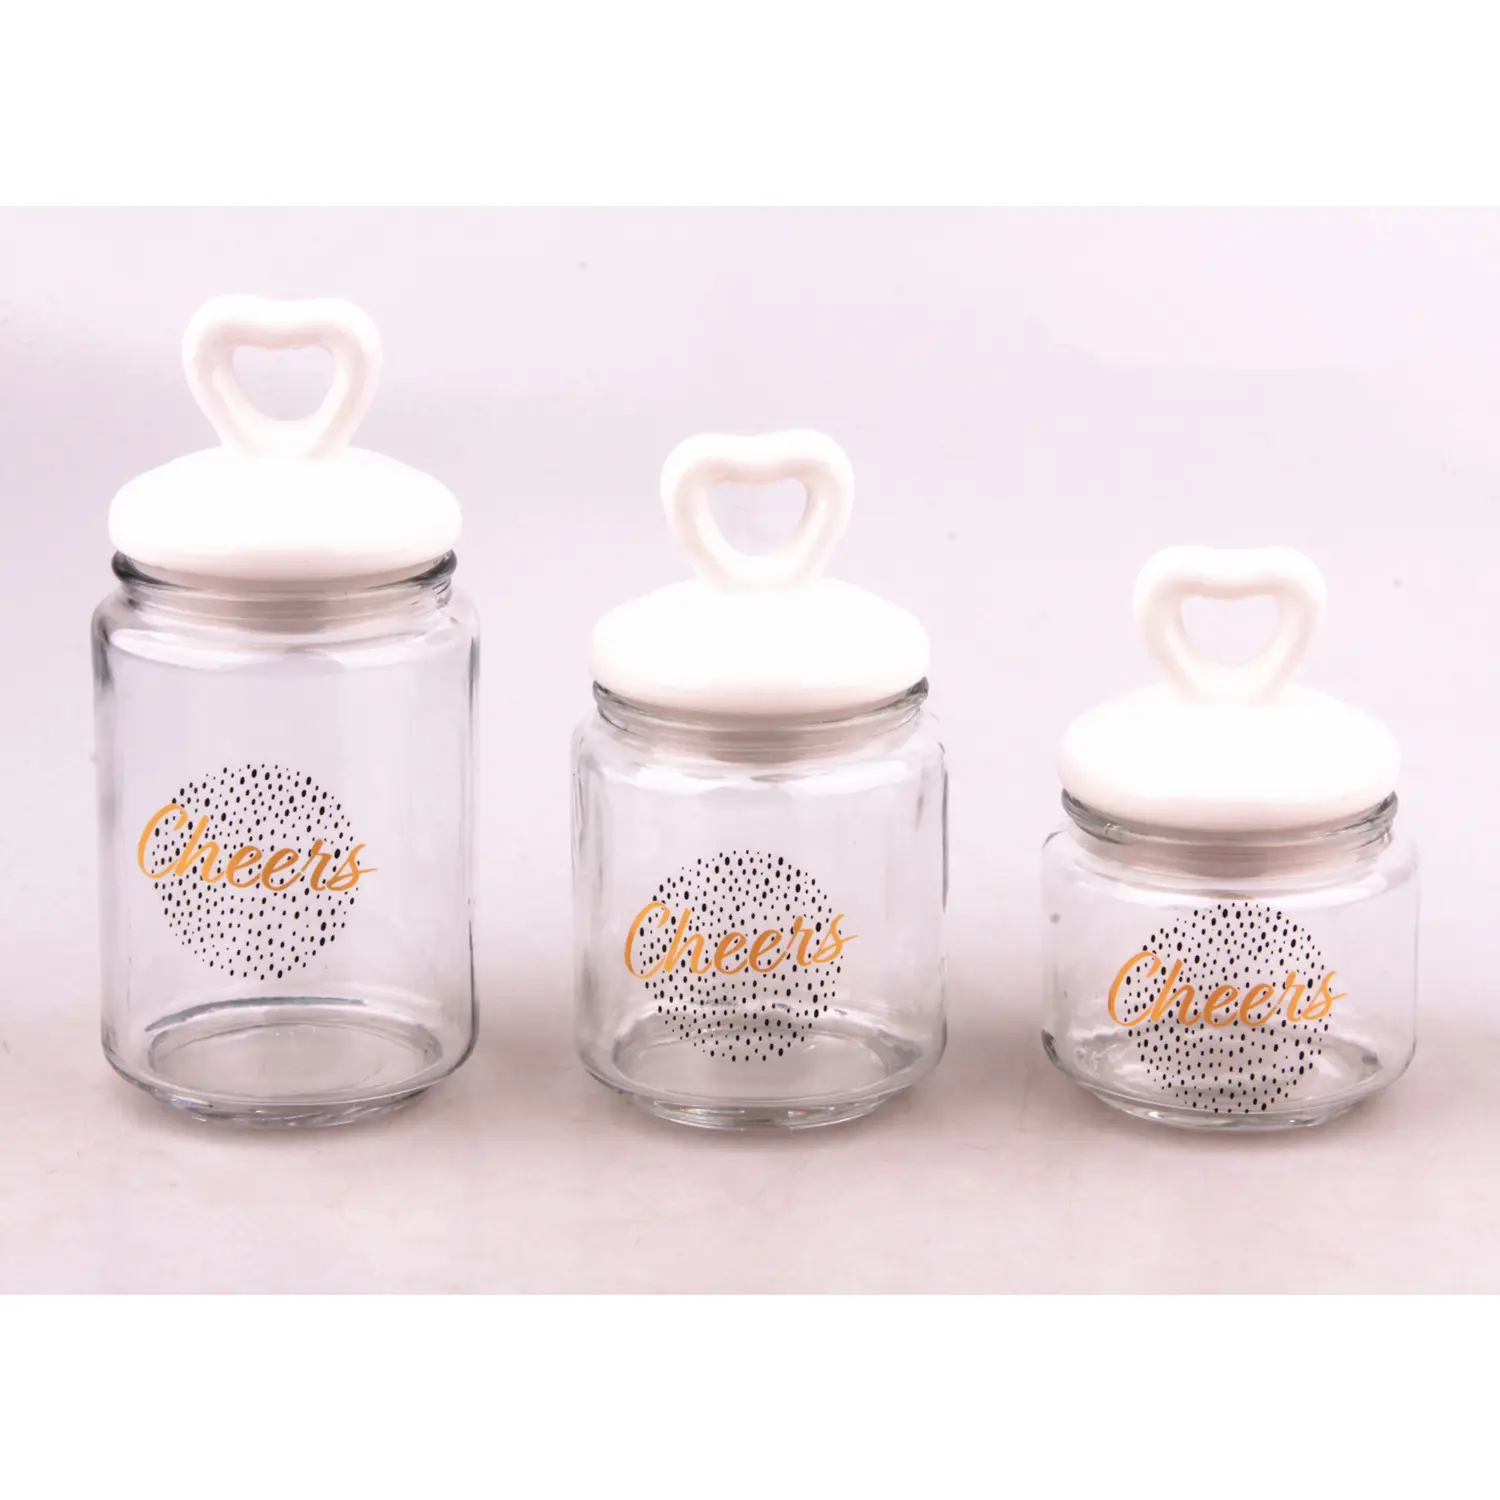 Best quality round glass candy storage canister jar food container with heart shape ceramic lid and decal for home decor